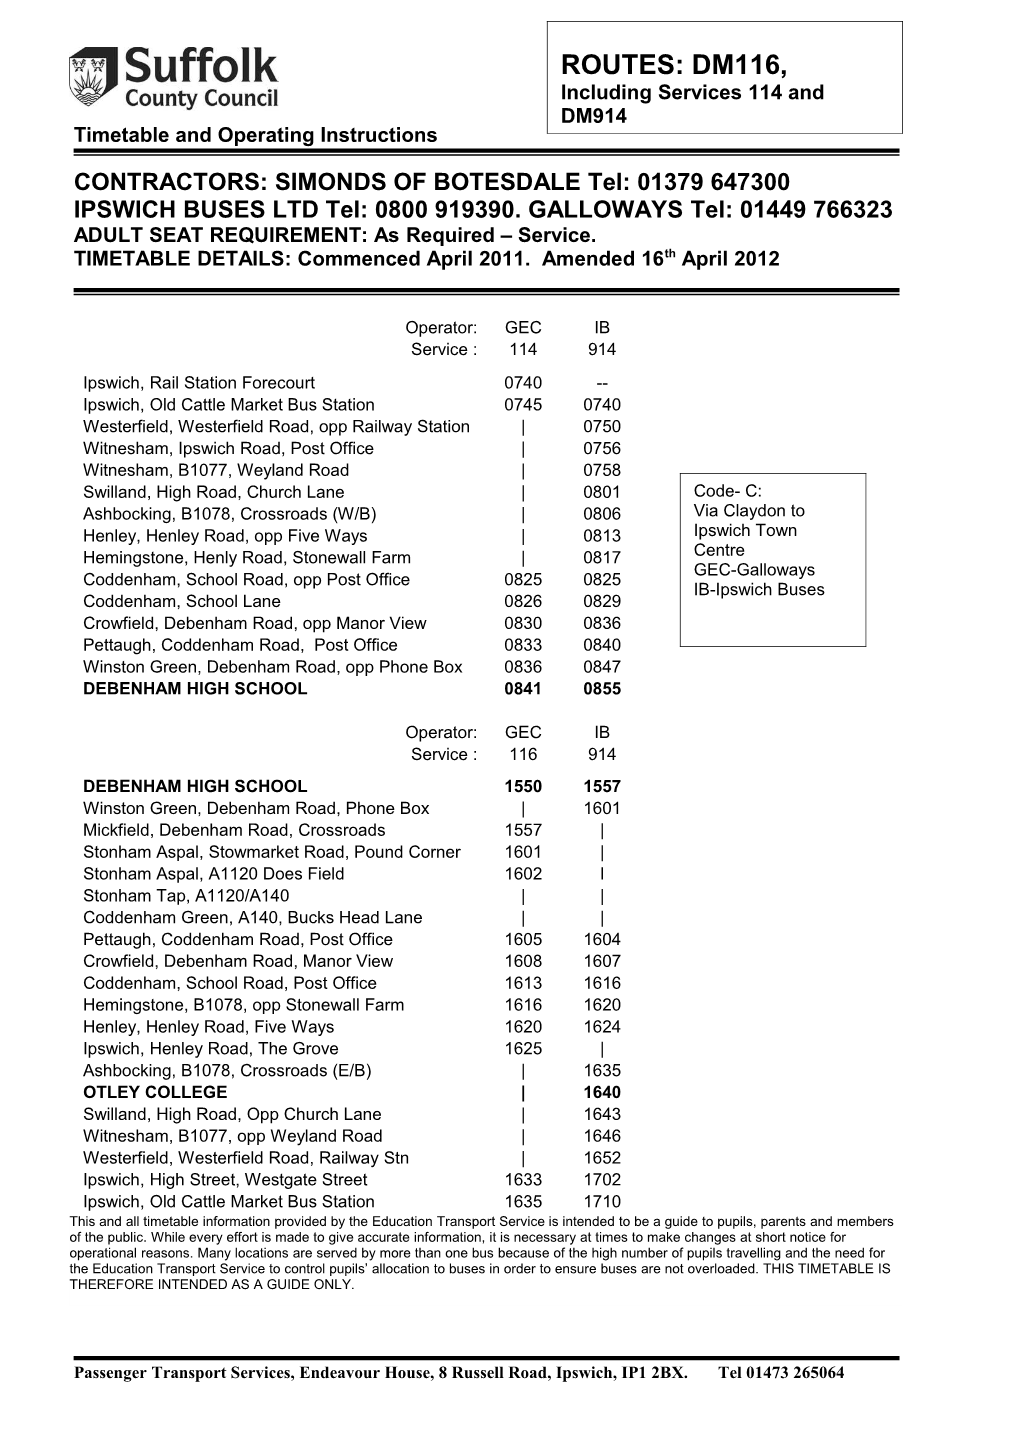 Timetable and Operating Instructions s1